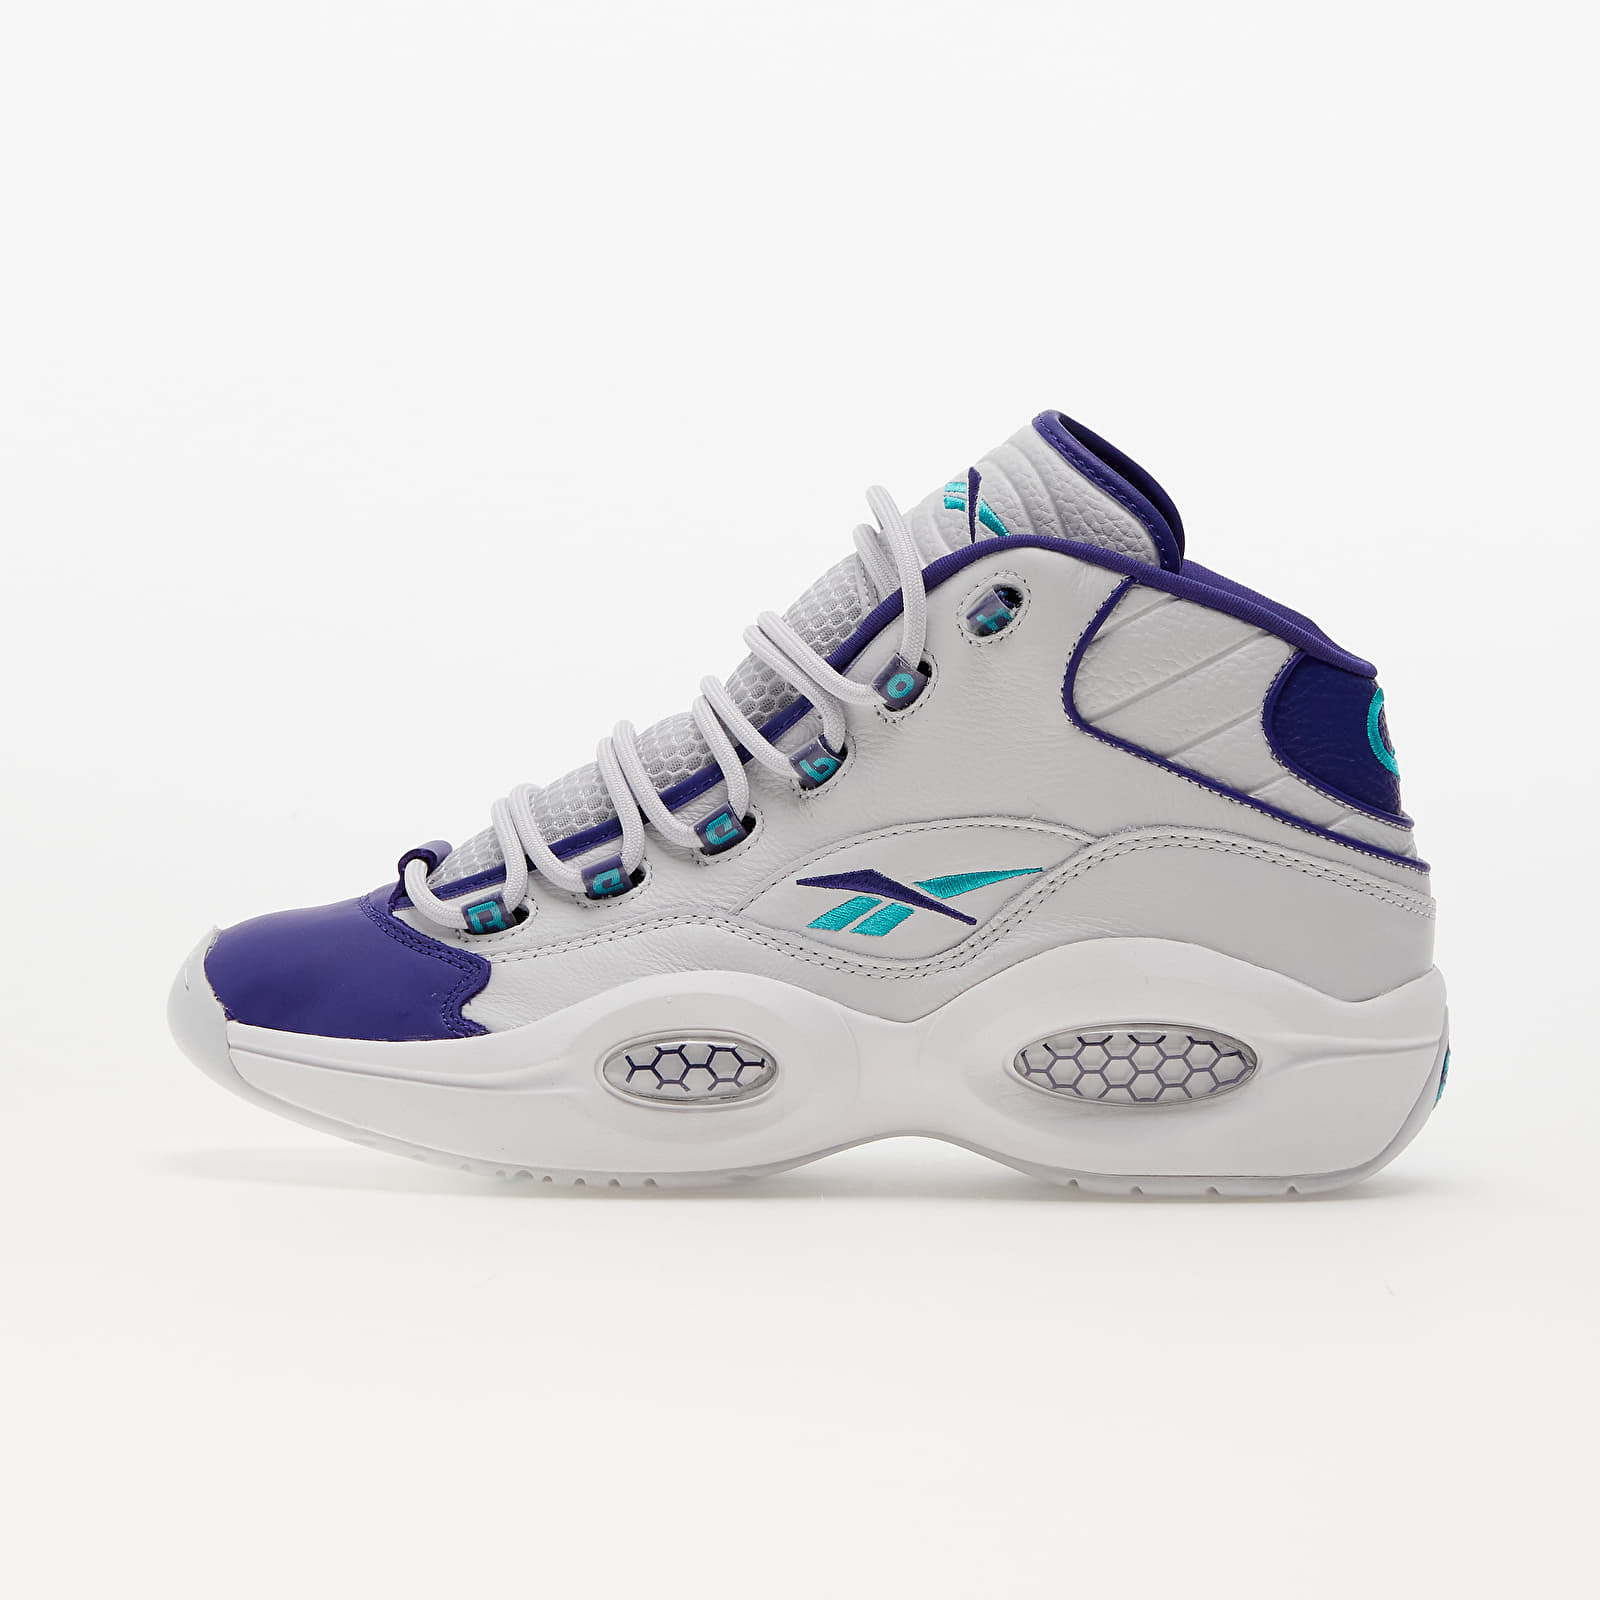 Men's shoes Reebok Question Mid Classic Grey 1/ Bold Purple/ Classic Teal